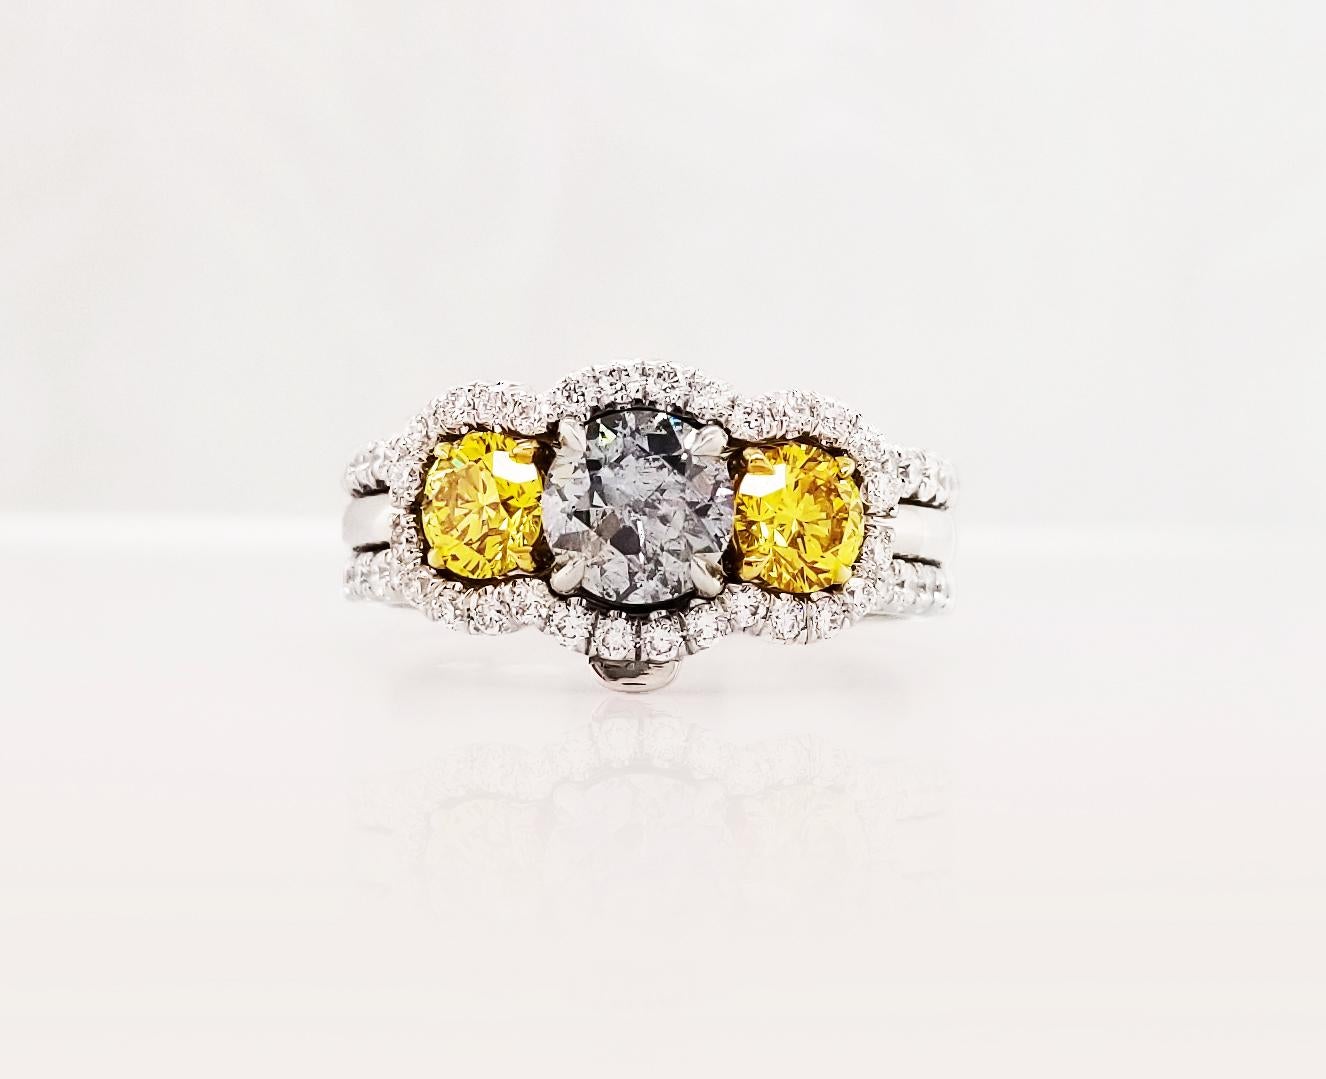 This astonishing Platinum Ring Jacket from Scarselli features a natural 0.69-carat Fancy Gray-Blue round brilliant diamond flanked by two beautiful natural vivid yellow diamonds 0.30 carat each. The two side stones are GIA certified (see Certificate